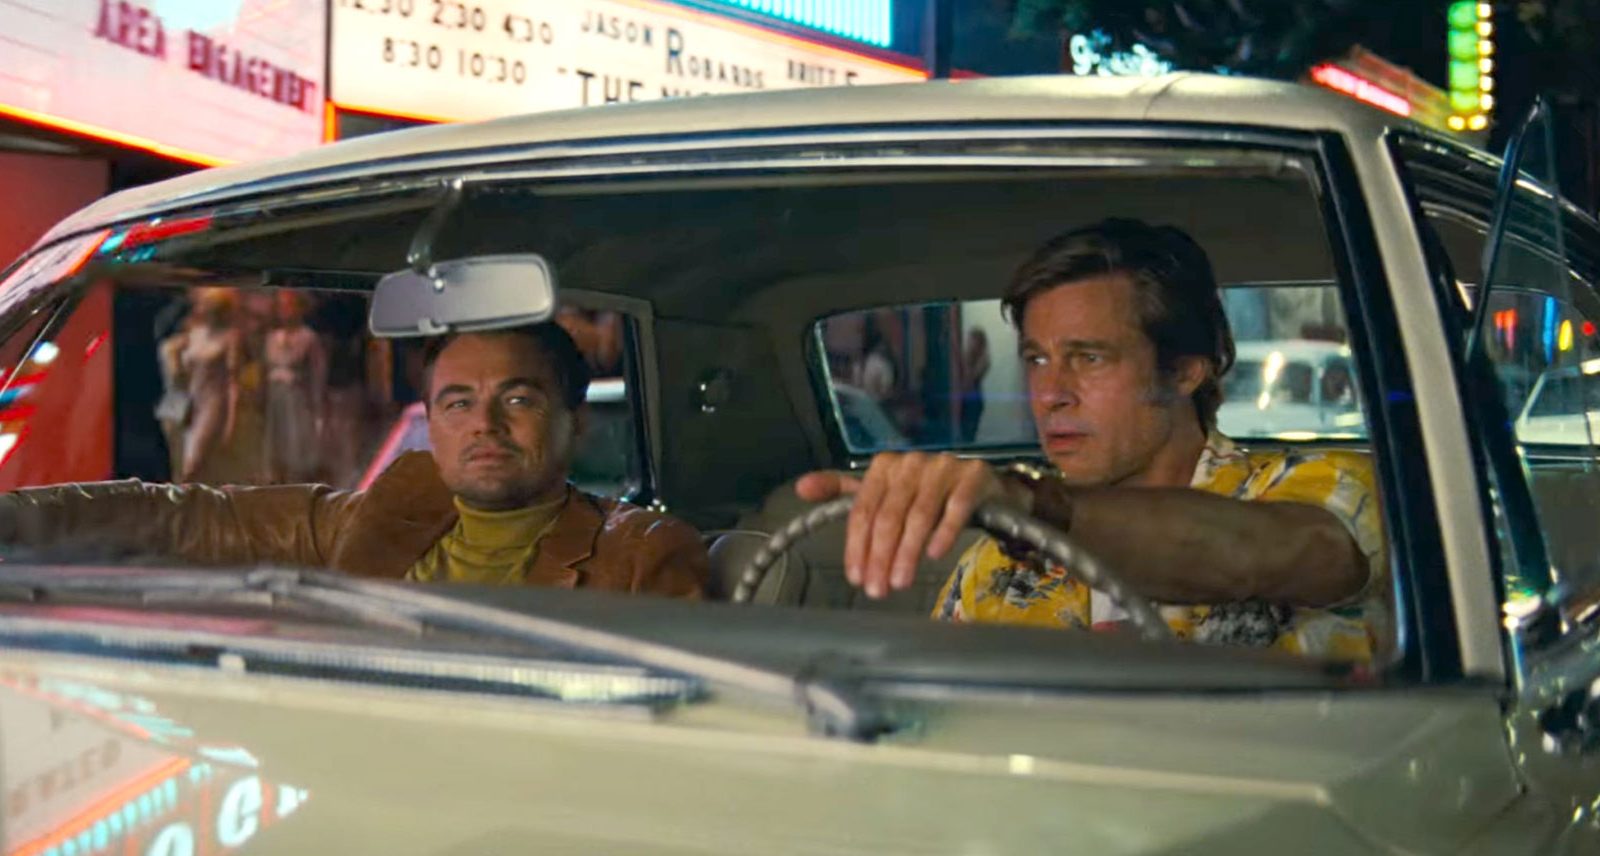 Quentin Tarantino's ‘Once Upon a Time in Hollywood’ Trailer Looks Much Too Fun